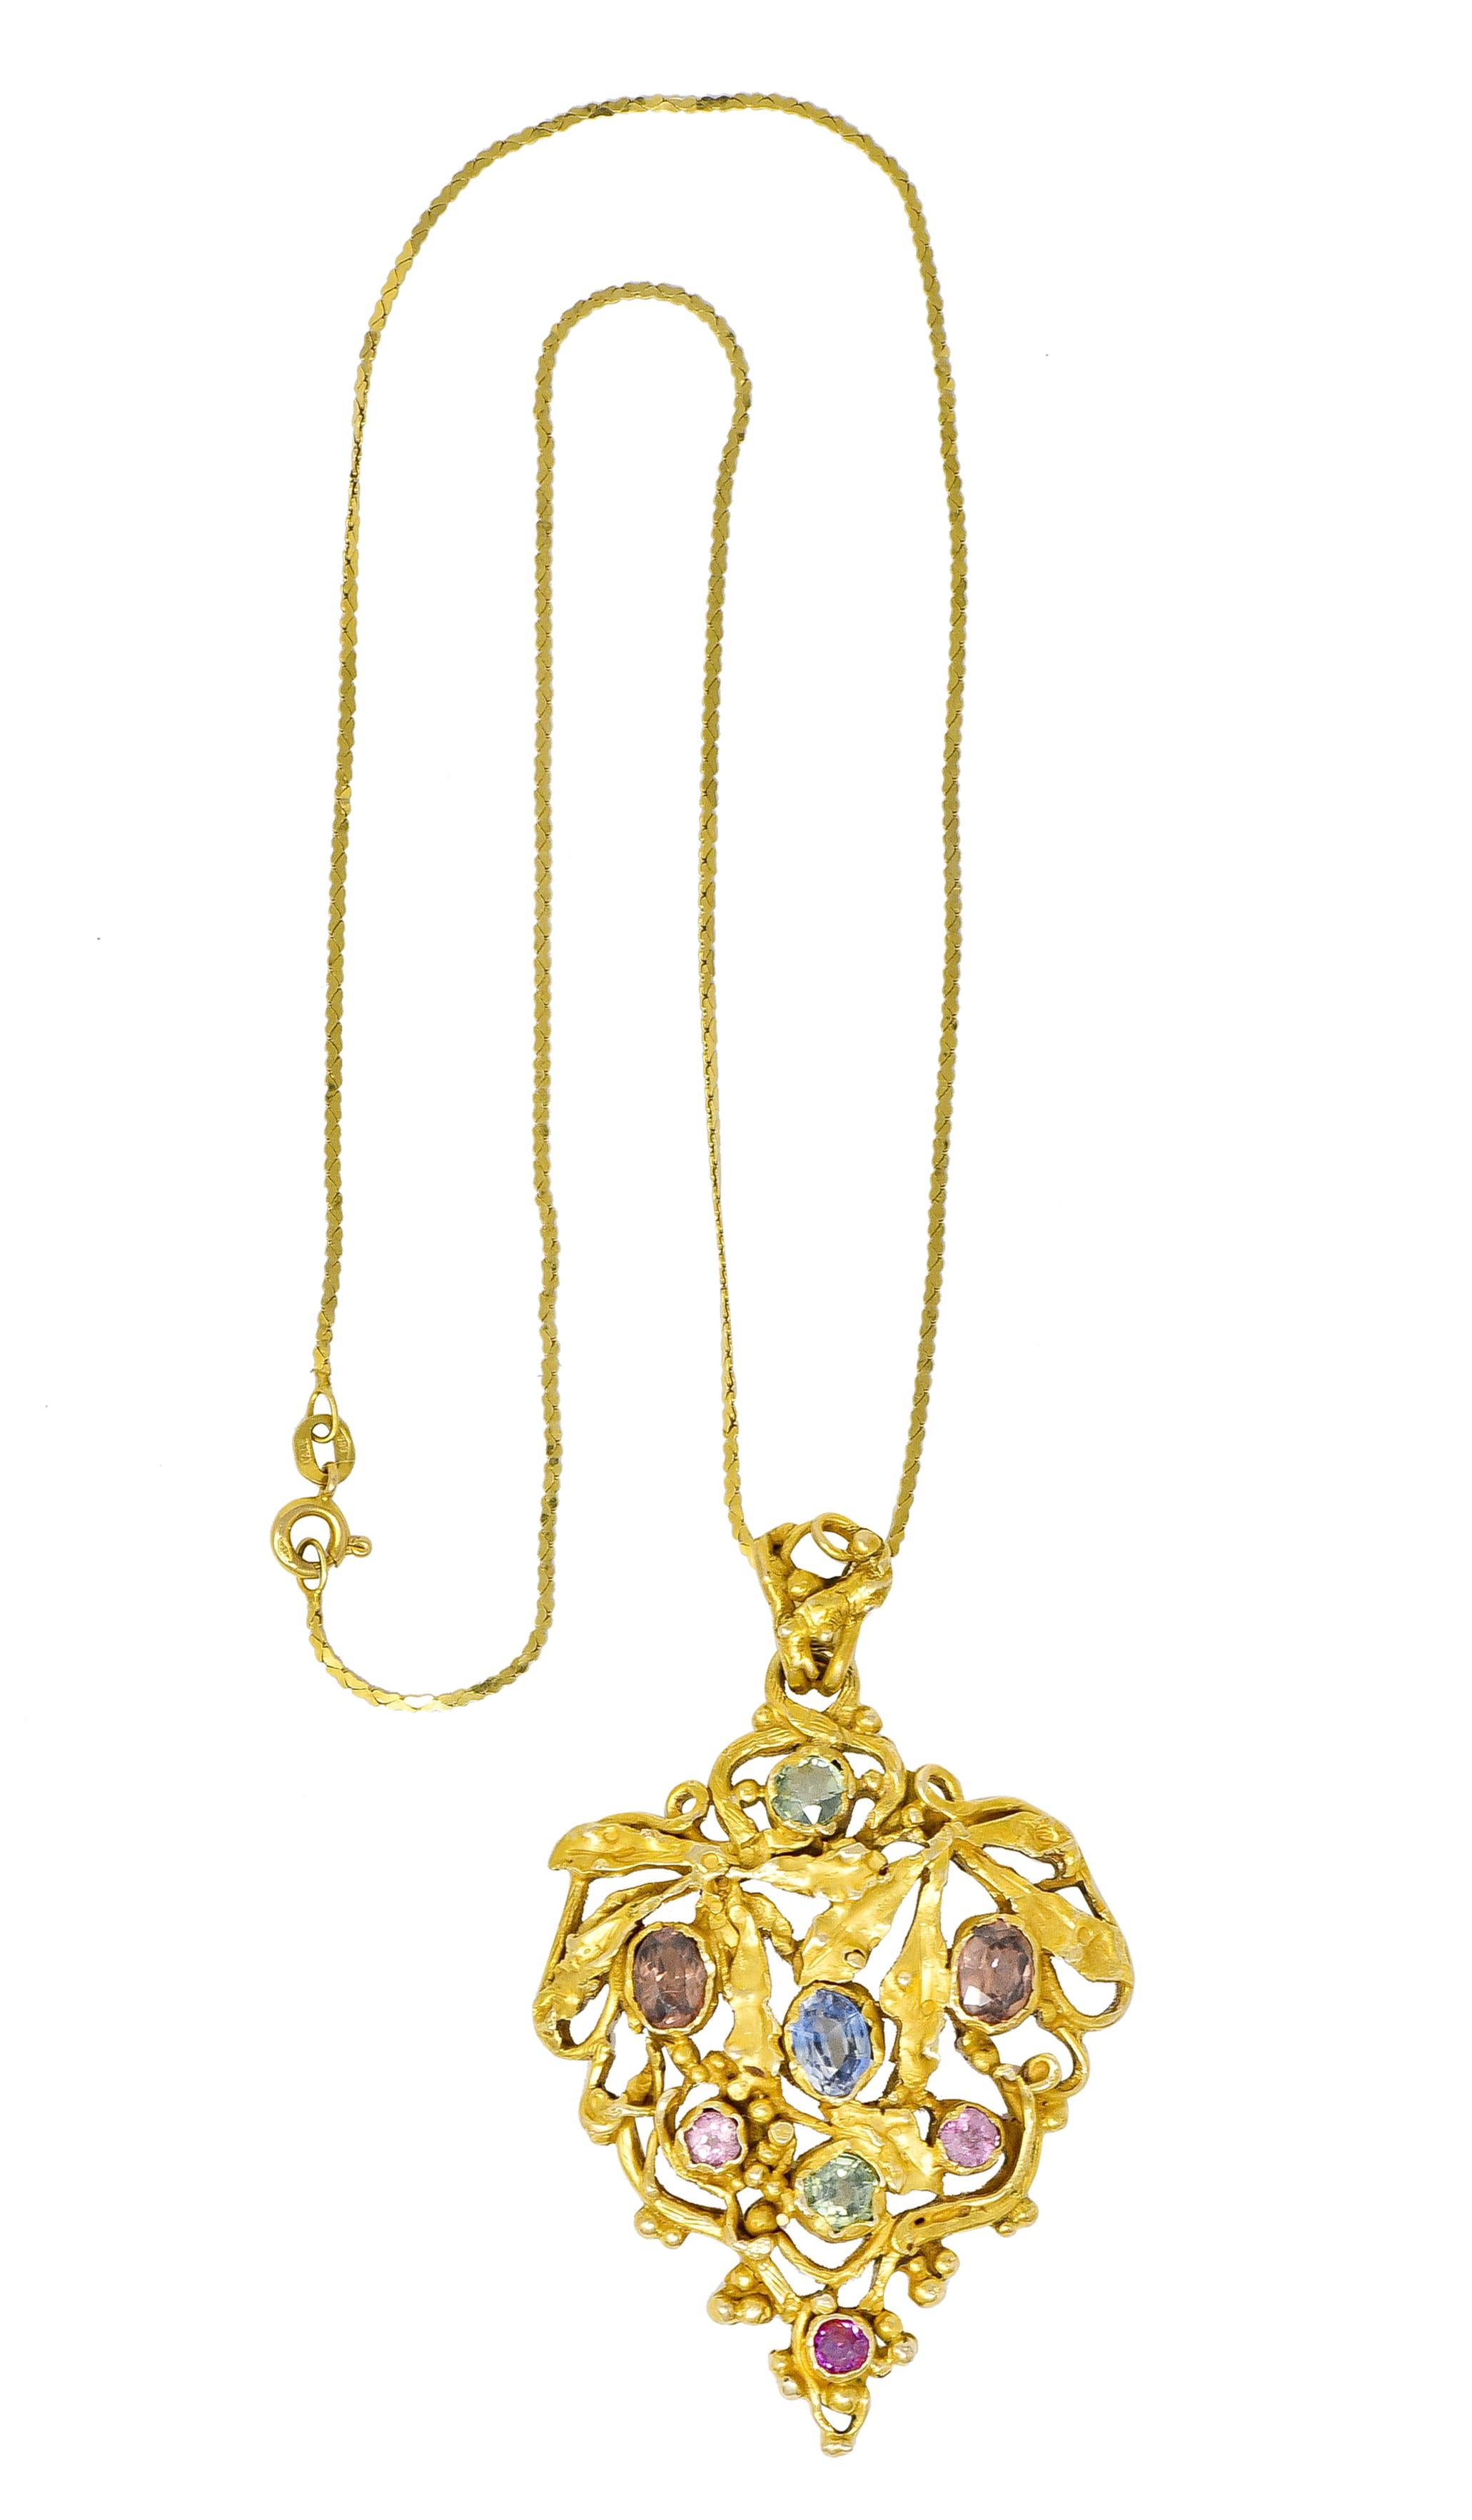 Necklace centers substantial pendant designed as a stylized cluster of grapes with textured leaves and gold bead accents

Round cut and oval cut gemstones are bezel set as grapes - sapphire, tourmaline, and zircon

With an ornate bale and